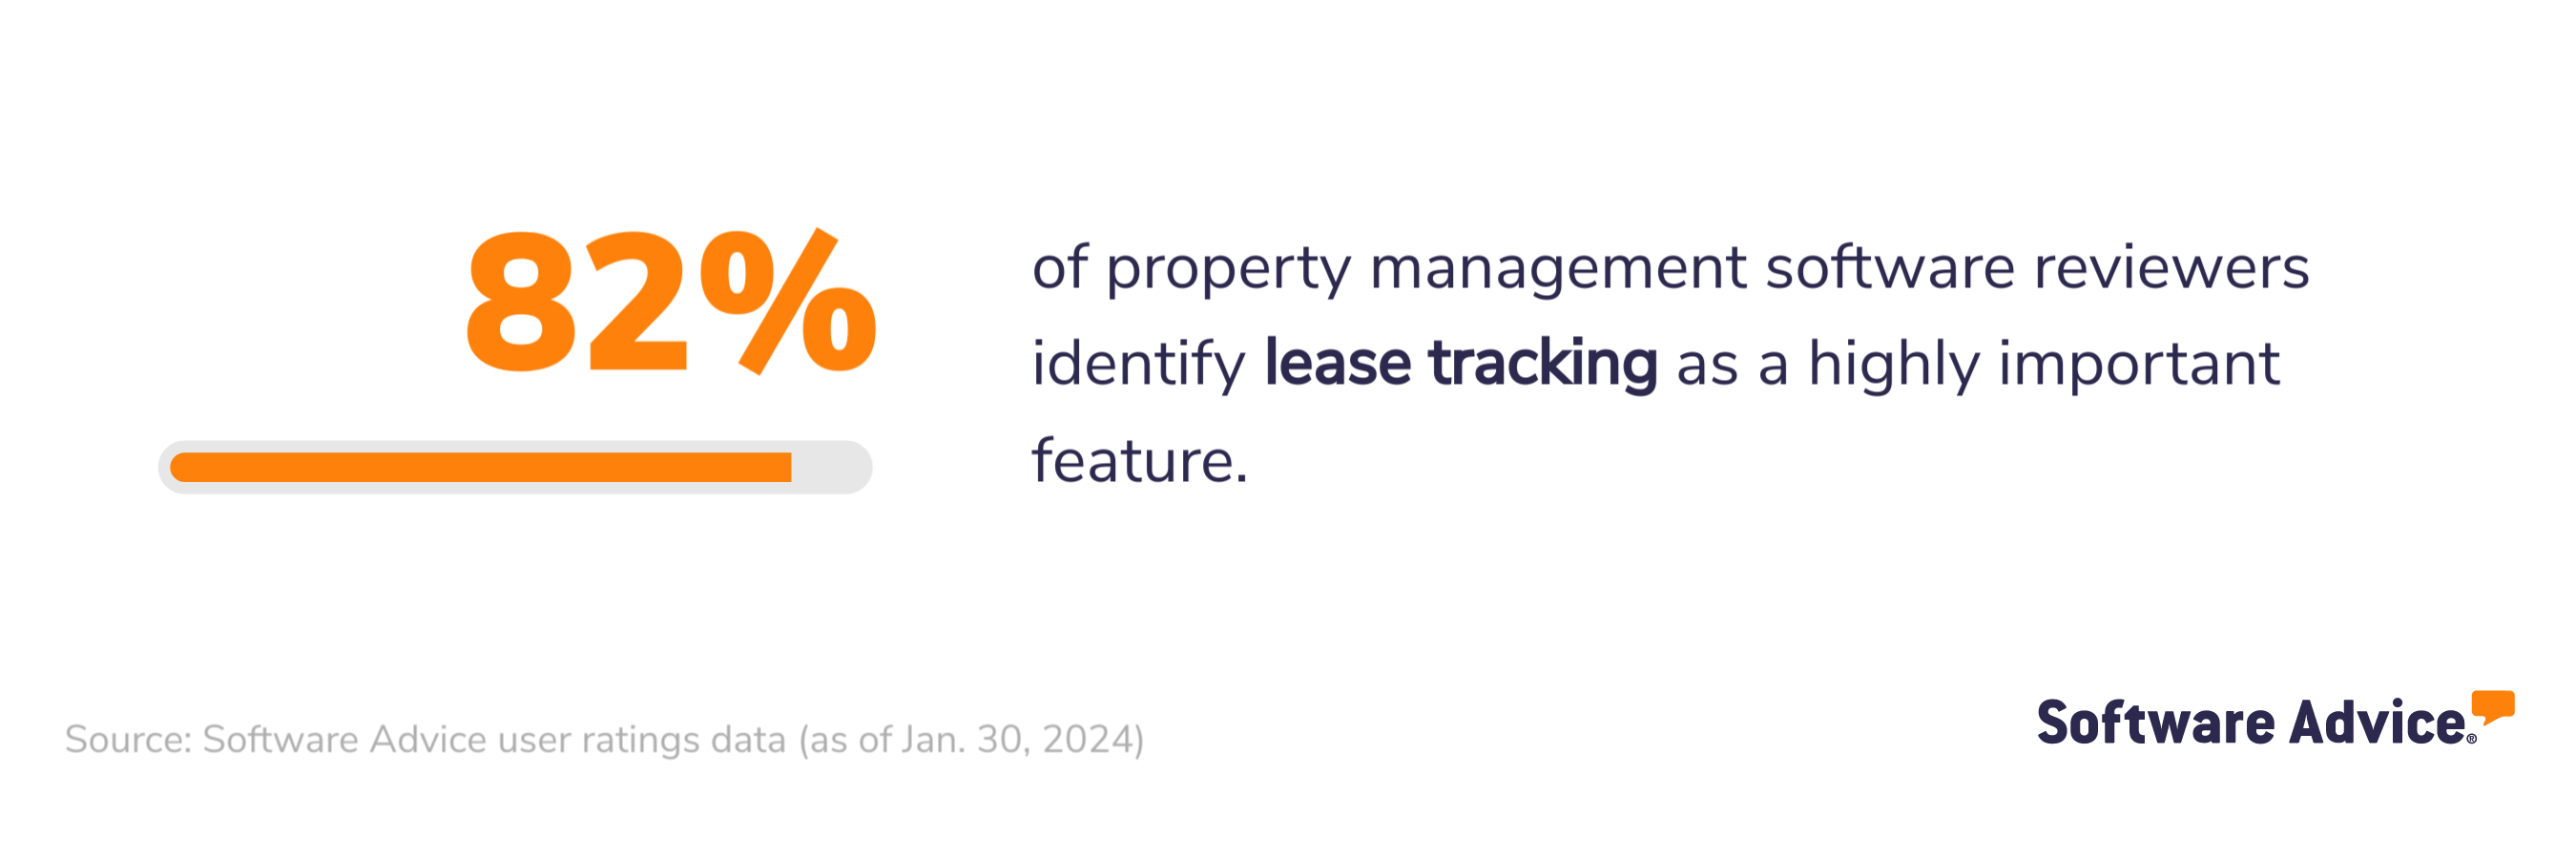 82% of property management software reviewers identify lease tracking as a highly important feature.